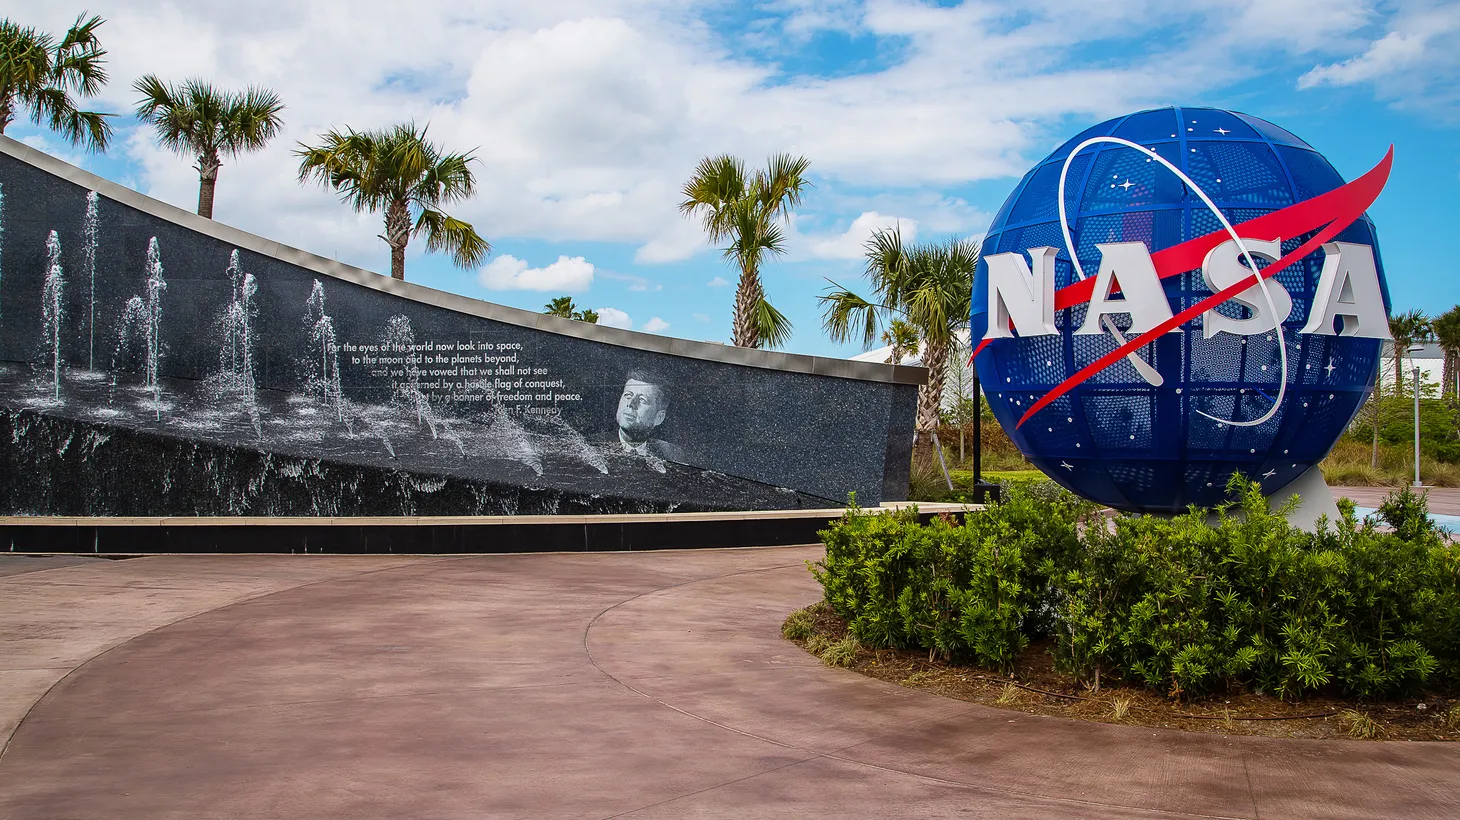 The NASA globe is seen next to the Kennedy memorial at the Space Center in Cape Canaveral, Florida.